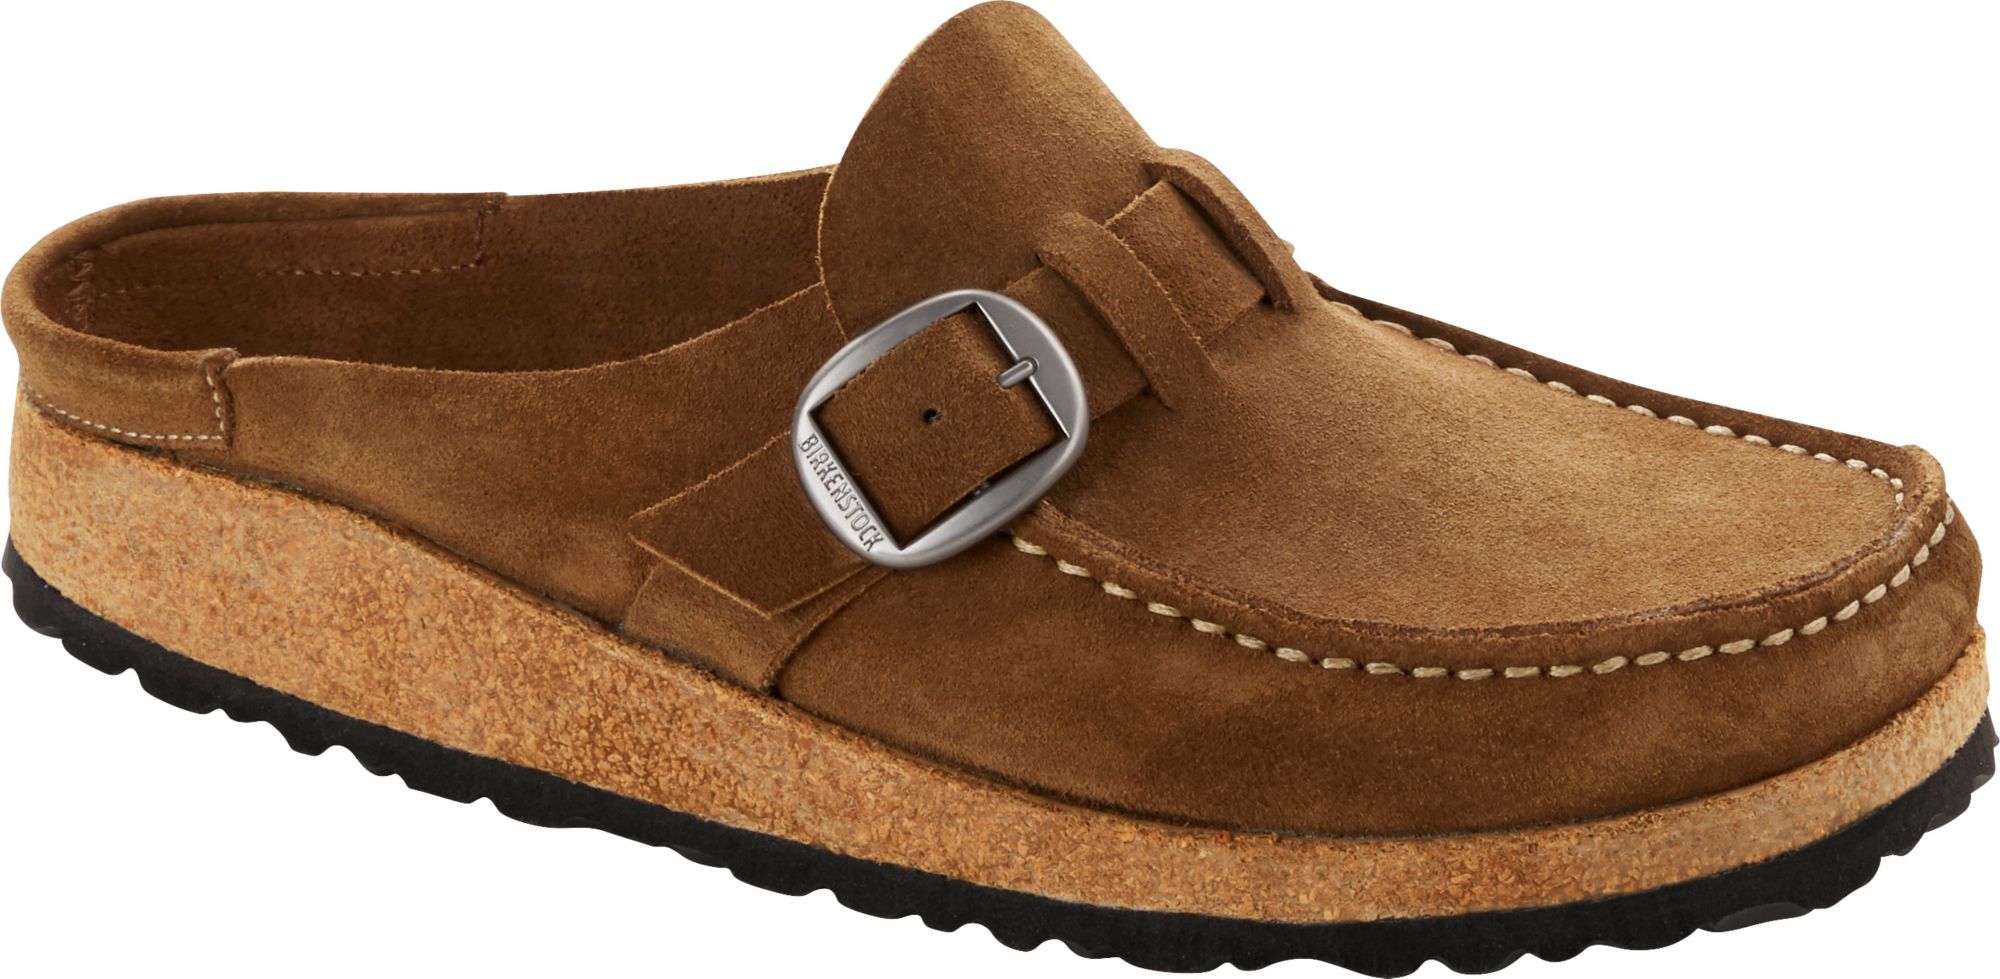 Birkenstock | Available at DICK'S Sporting Goods